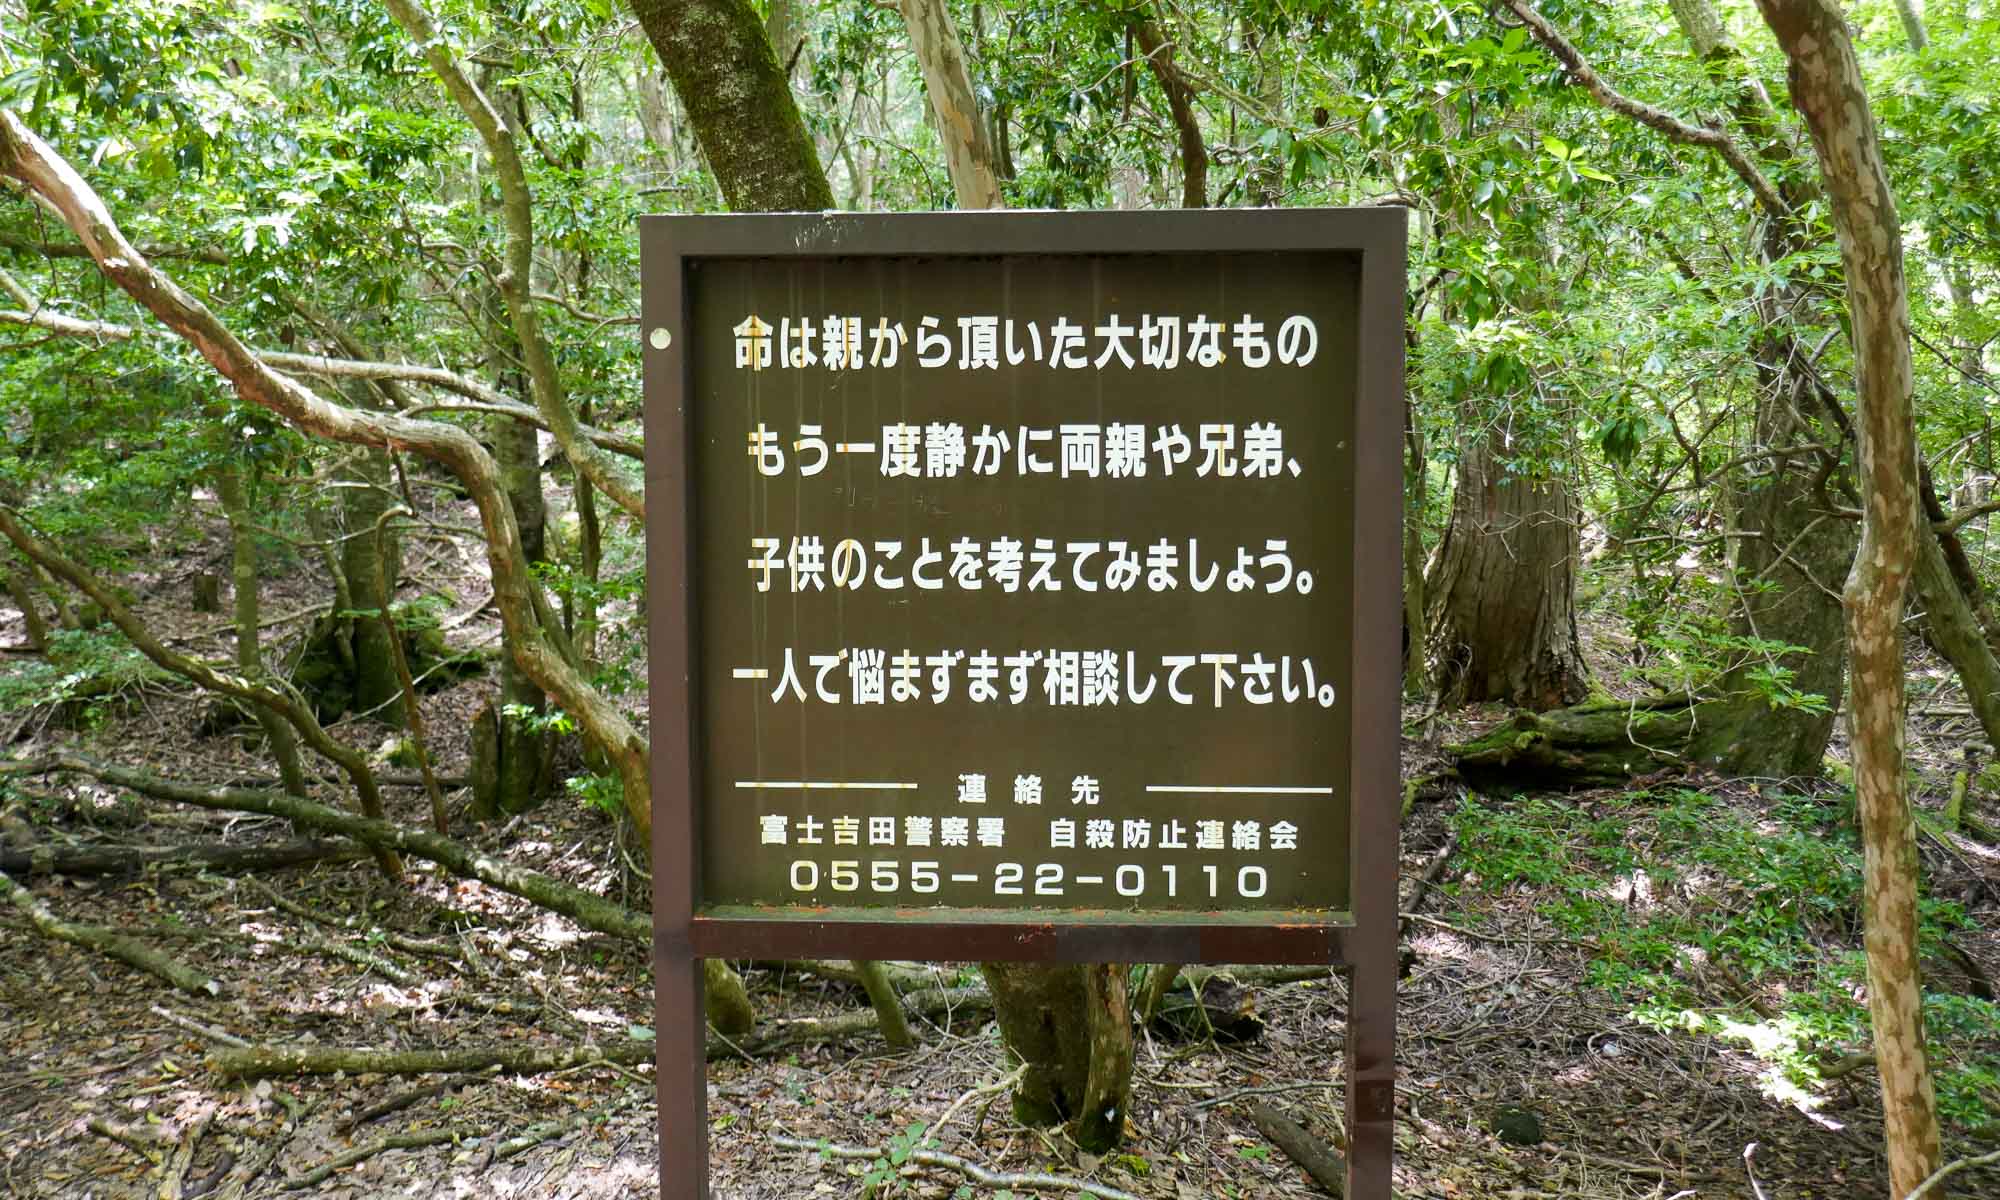 One of the signs at Aokigahara with a phone number for those feeling suicidal